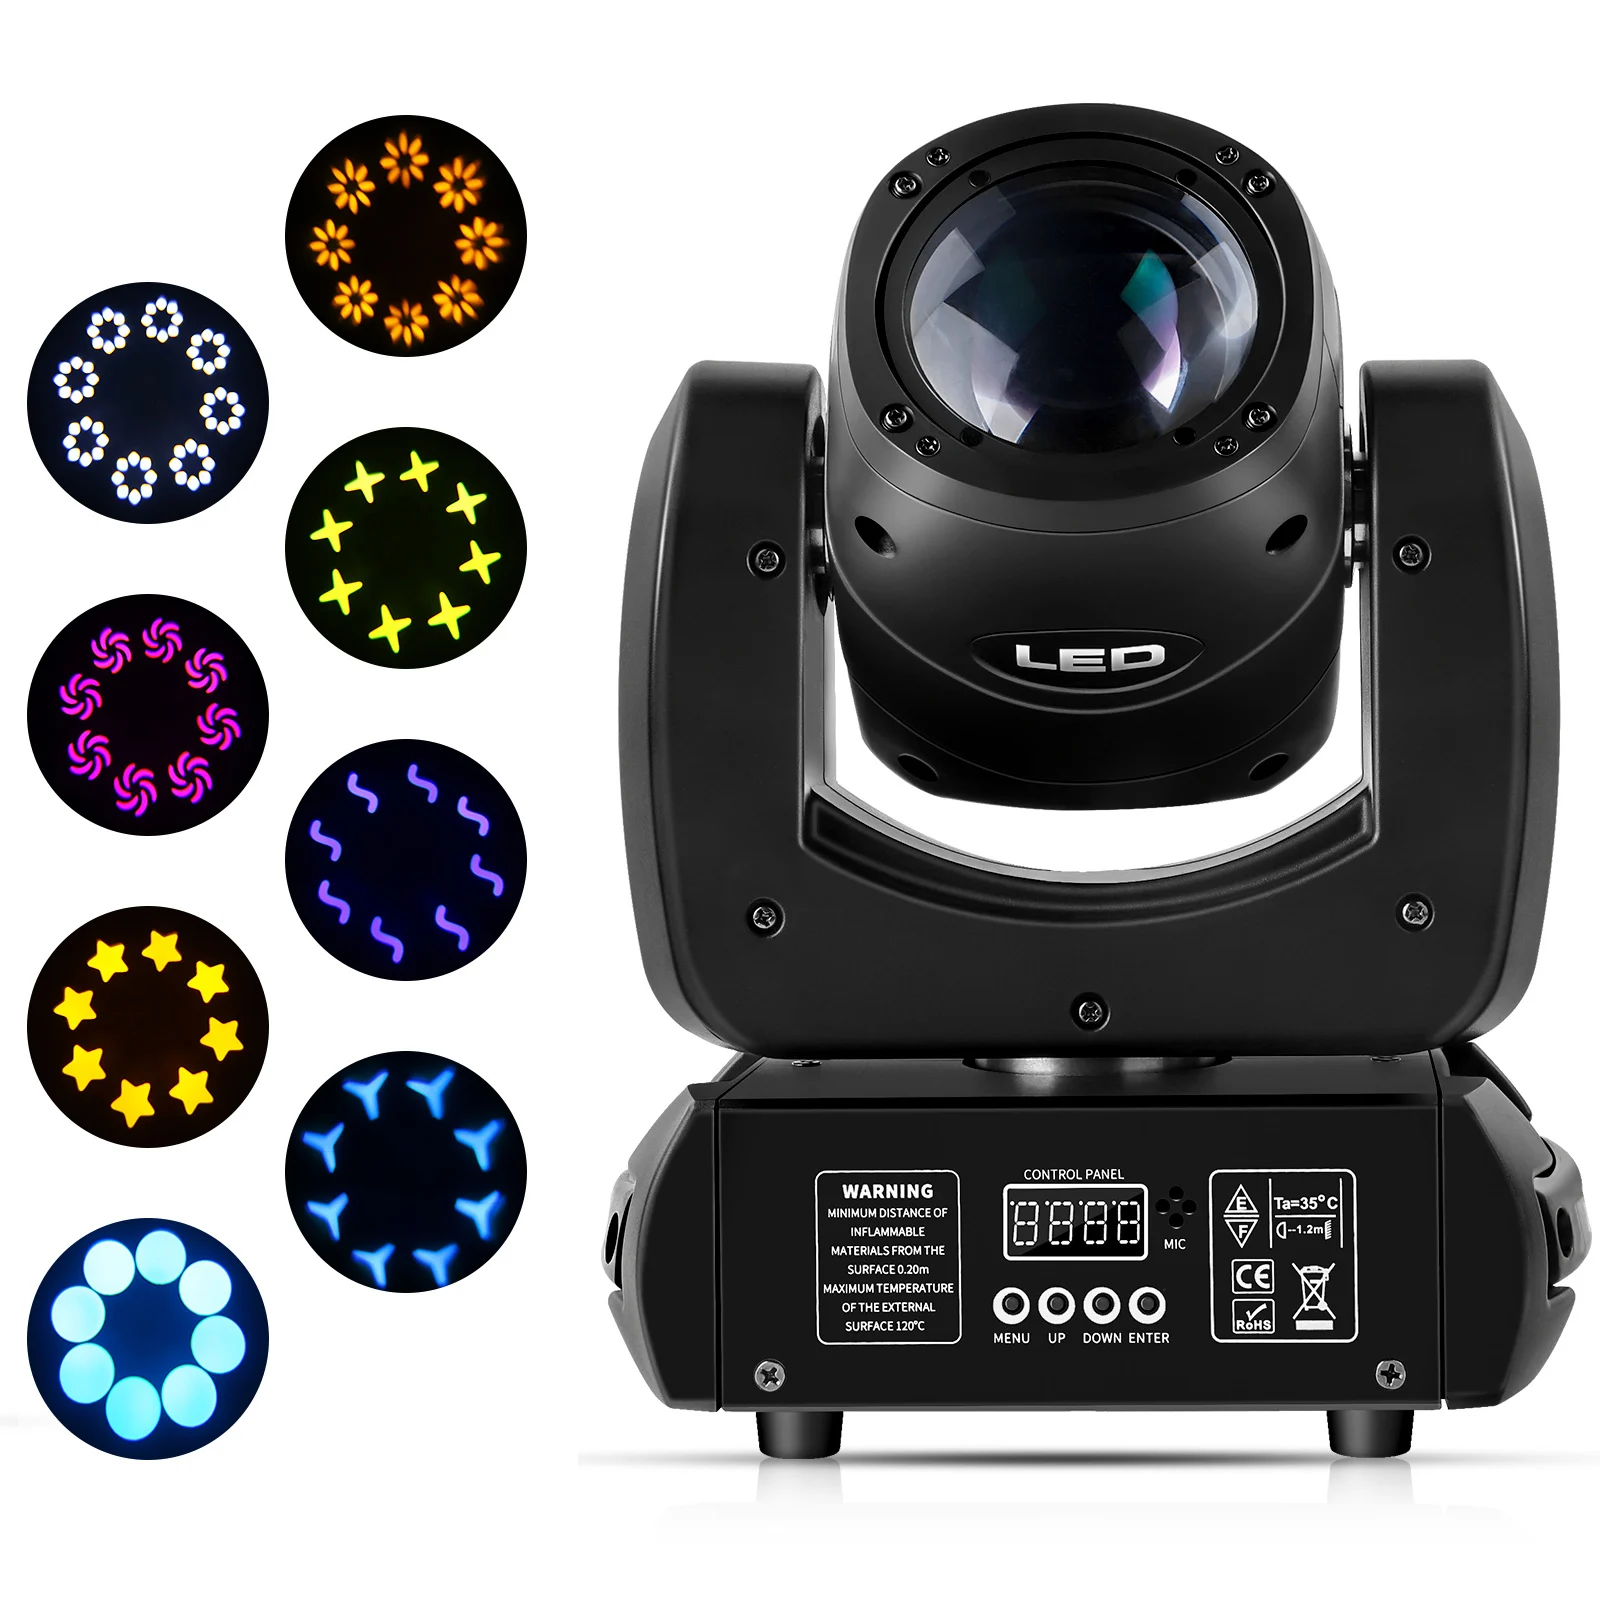 U`King 100W LED Moving Head Light Stage Lighting DJ Lights 8 Gobos Beam Wash Light by DMX and Sound Activated Control Professional 9/11 Channels for Church Wedding Disco Party Nightclub Live Show 